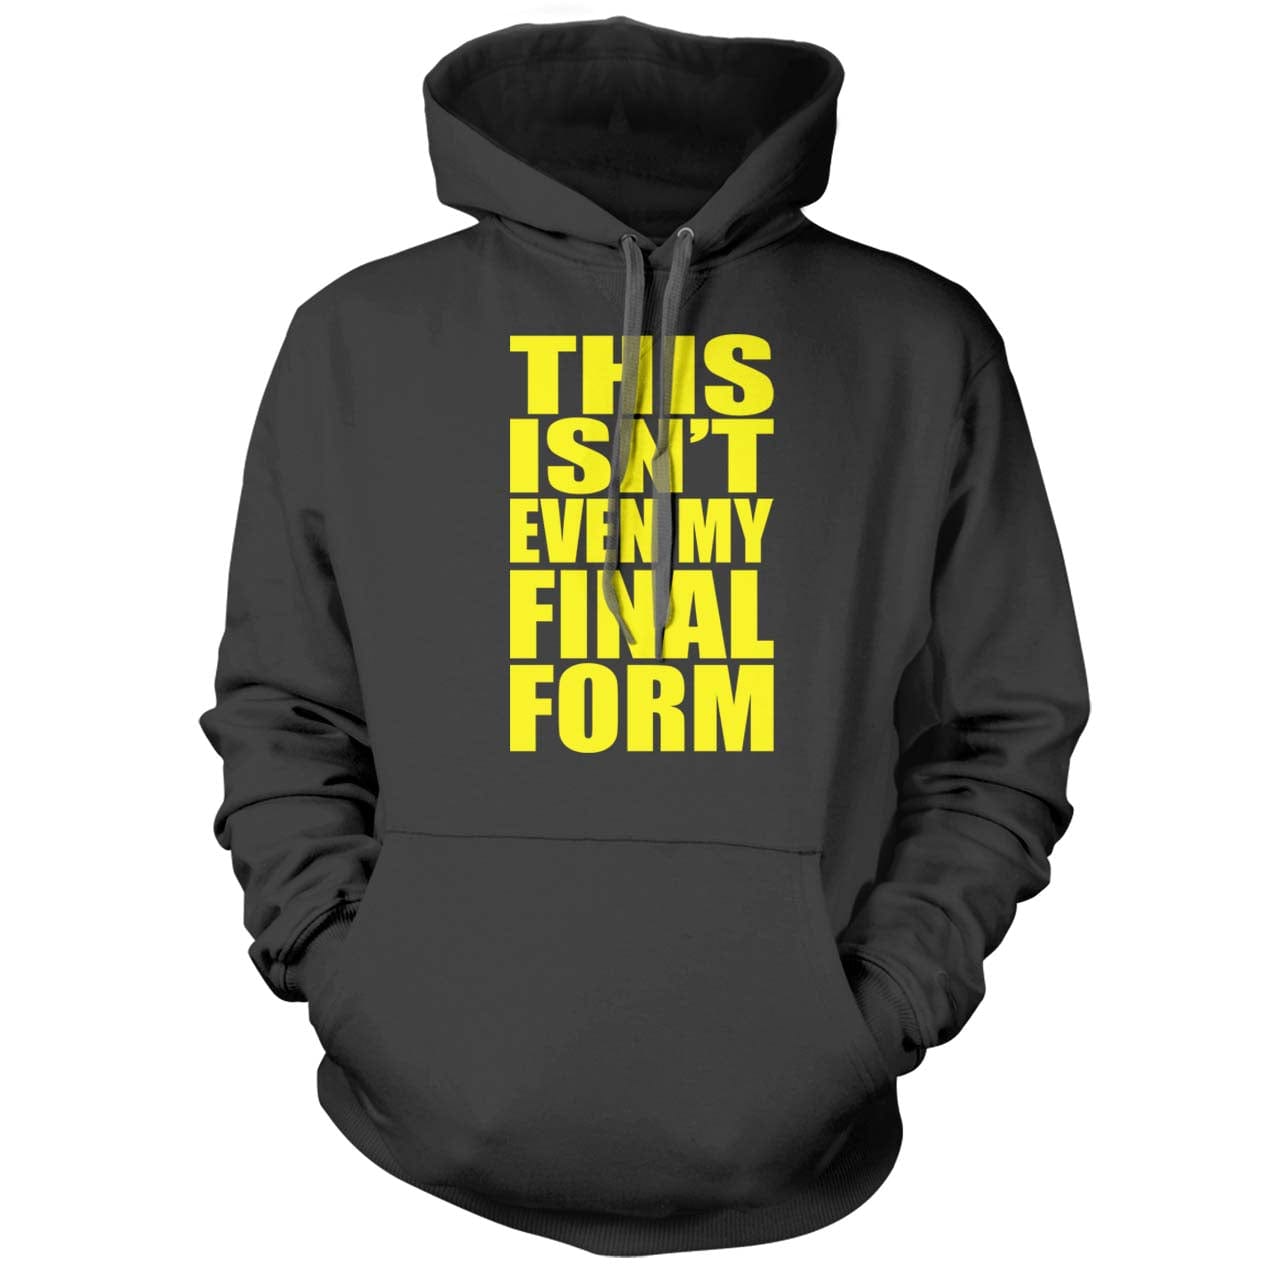 This isn't even my Final Form Hoodie